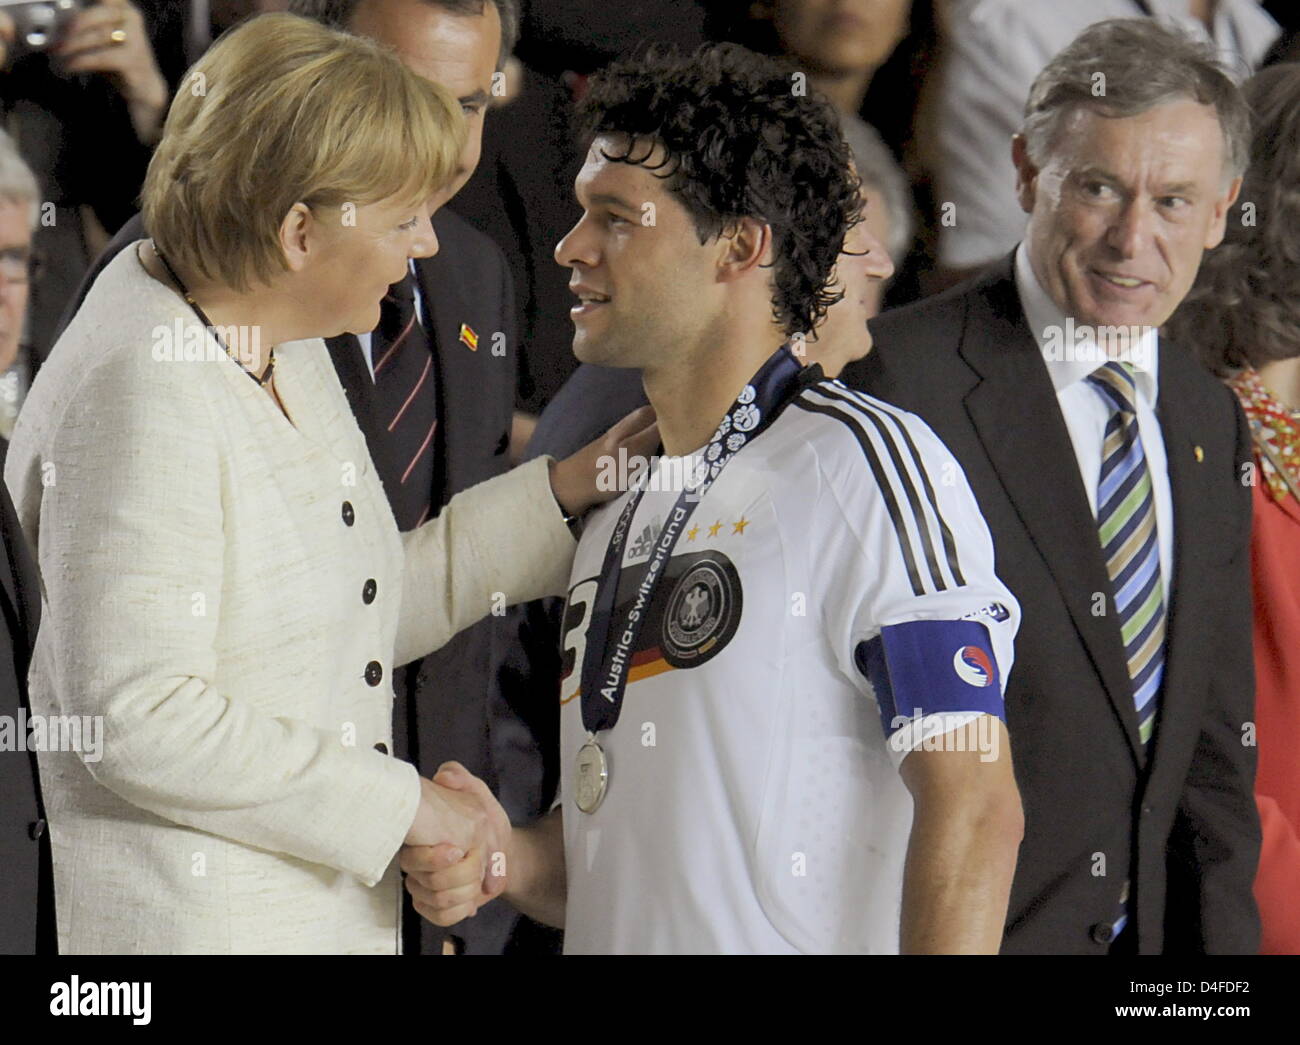 German Chancellor Angela Merkel (l) hugs German soccer player Michael Ballack at the end of the UEFA EURO 2008 final match between Germany and Spain at the Ernst Happel stadium in Vienna, Austria, 29 June 2008. Looking on is German President Horst Koehler. Spain won the match by 1:0. Photo: Peter Kneffel dpa +++###dpa###+++ Stock Photo